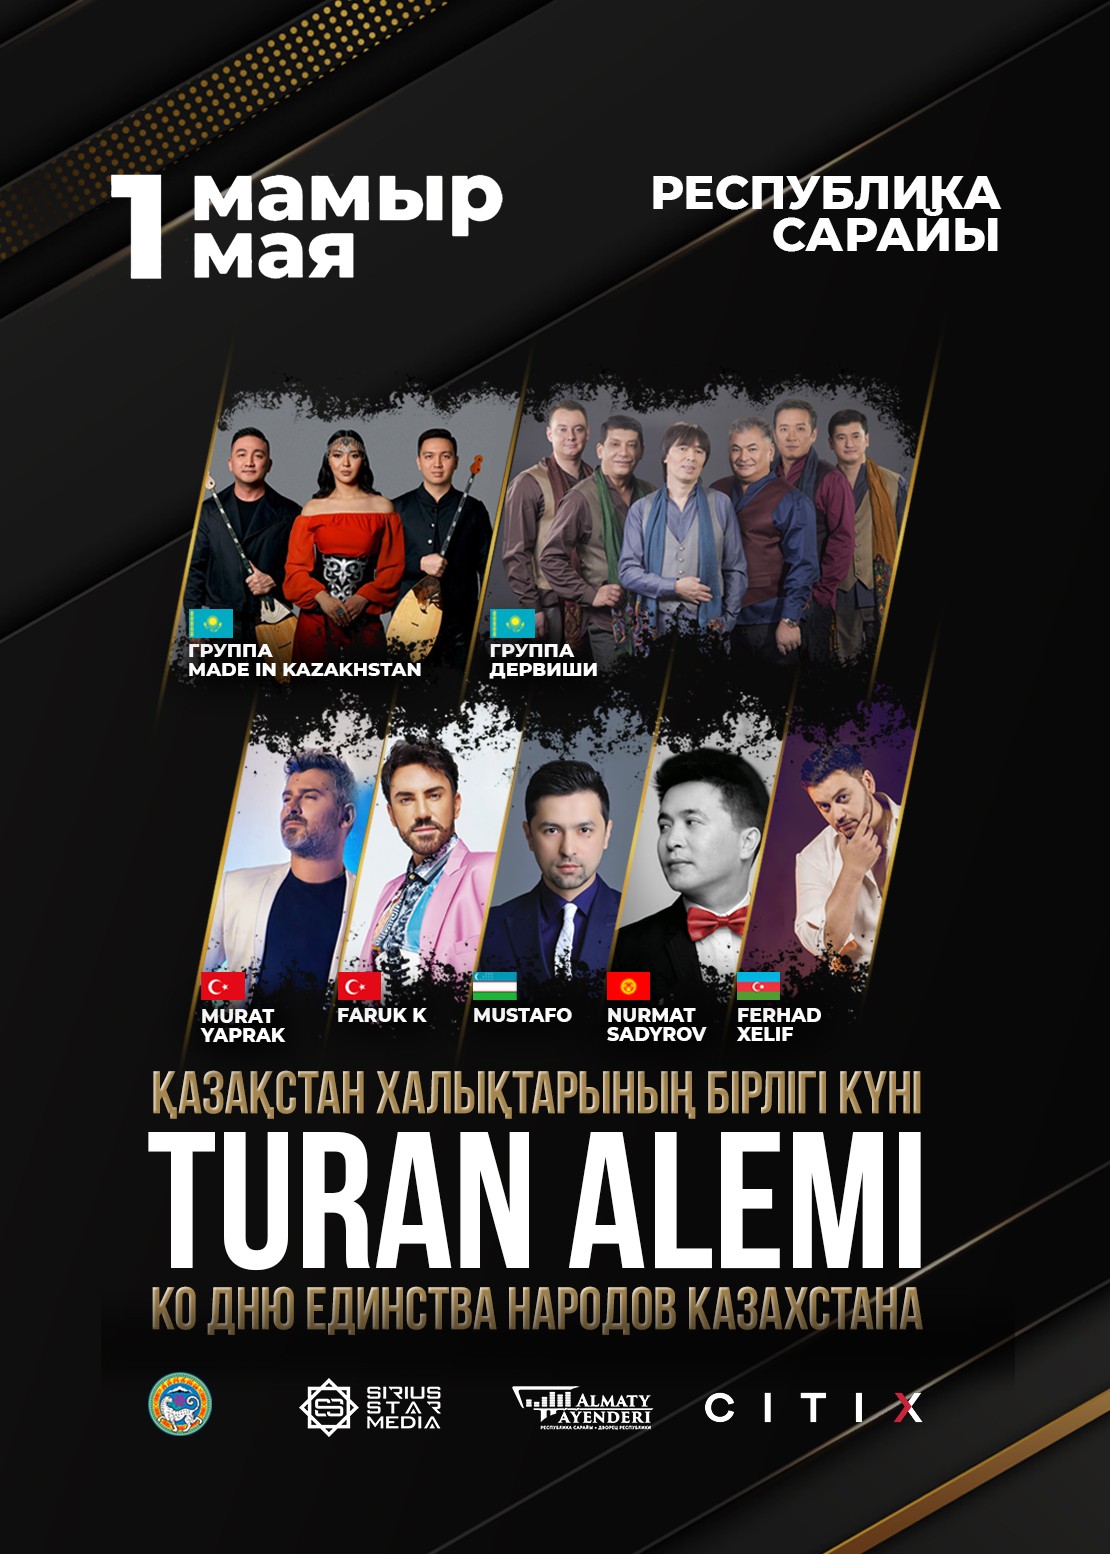 Music concert of Turkic-speaking peoples